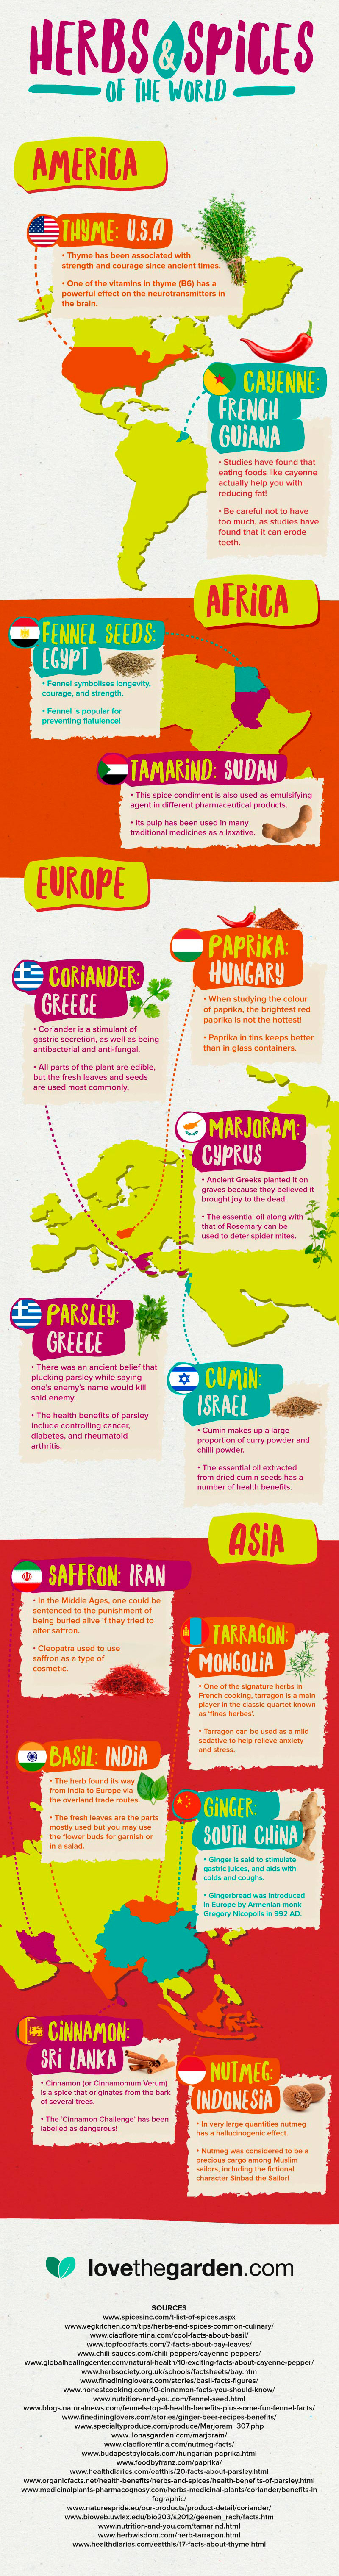 Herb and spice world map infographic